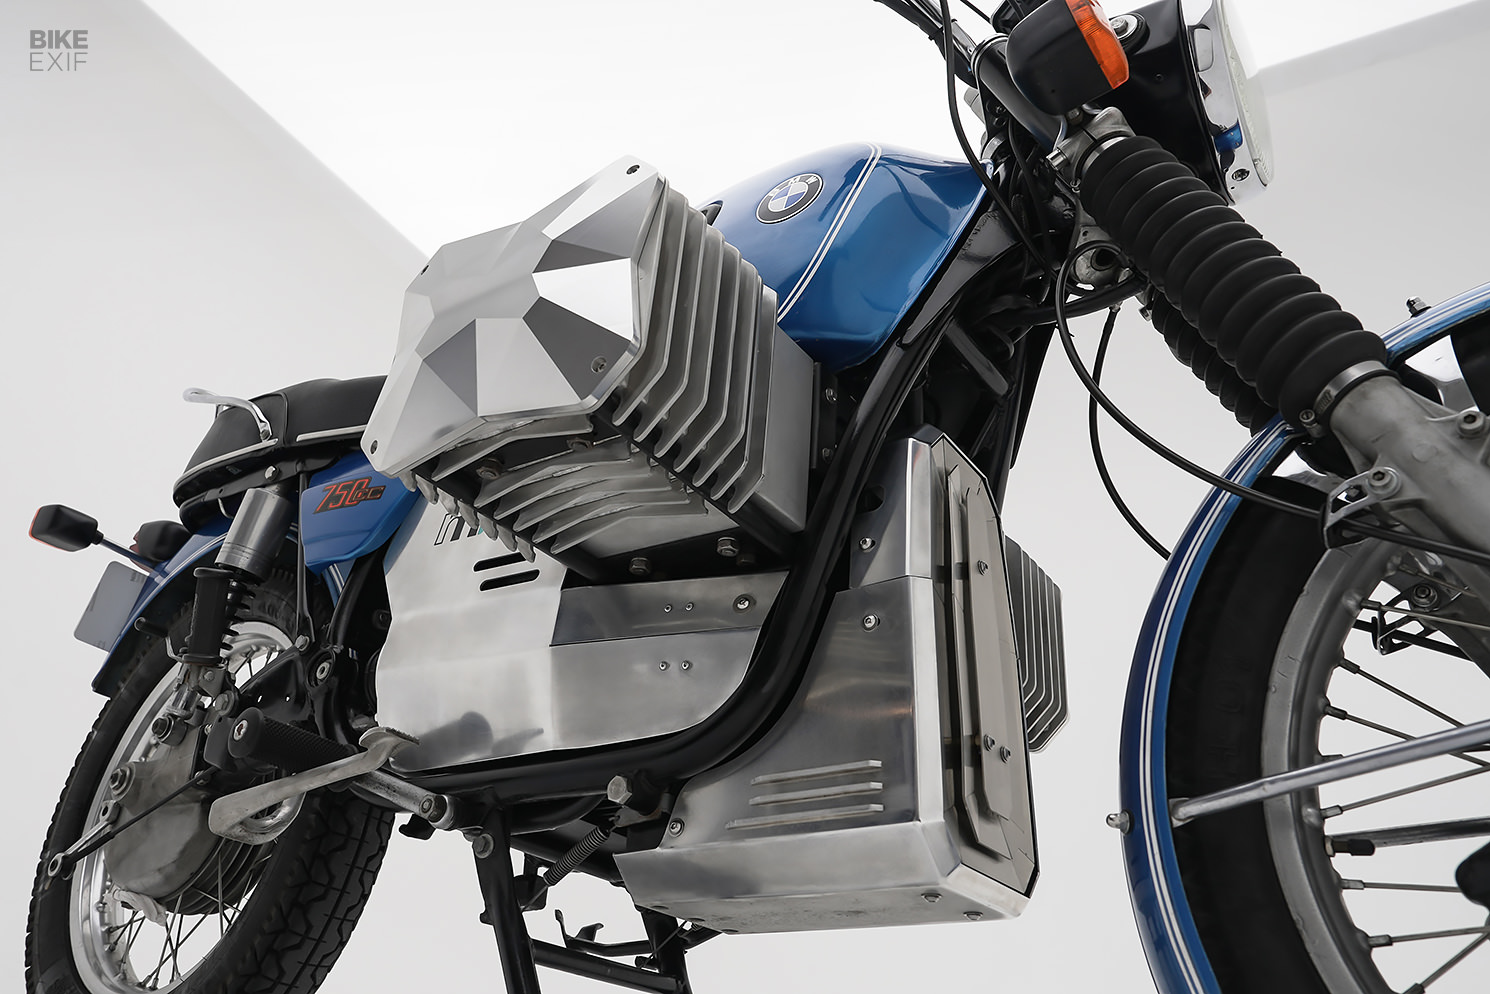 Print to Perform: Creating a Custom-Fitted Motorcycle Airbox 